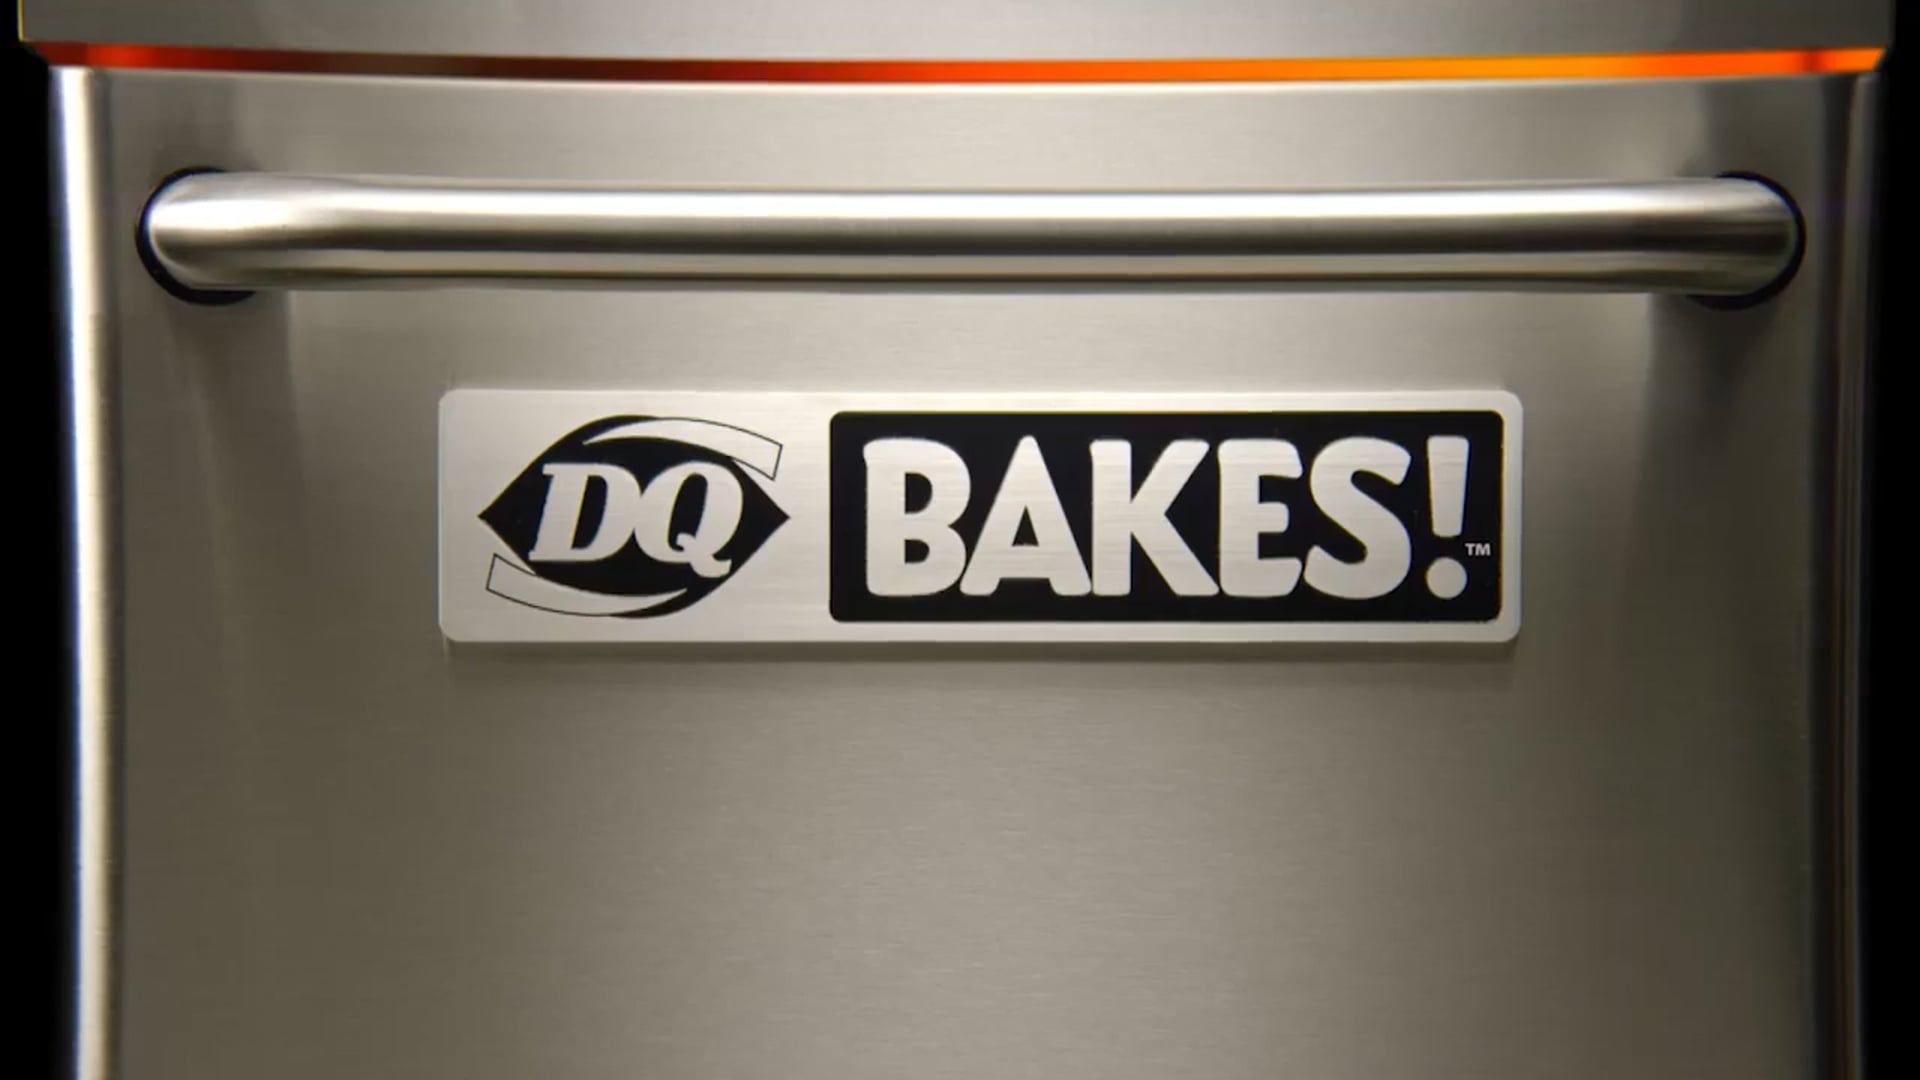 DQ Bakes! Oven-Hot Sandwiches 30sec